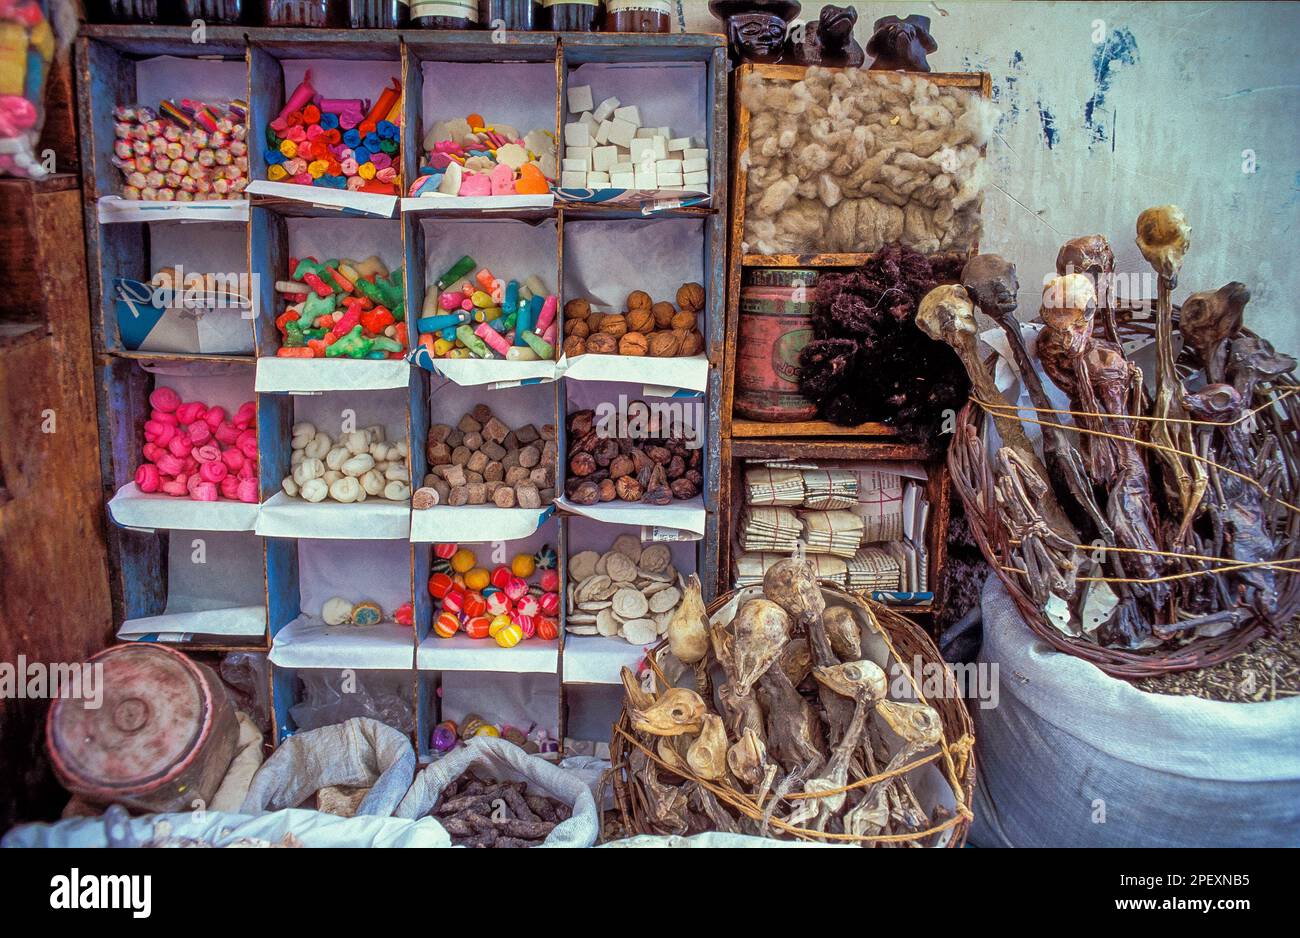 Bolivia, La Paz - Popular tourist destination where so called 'witches' sell roots, dried snakes, frogs, turtles and dried llama fetuses for good luck Stock Photo